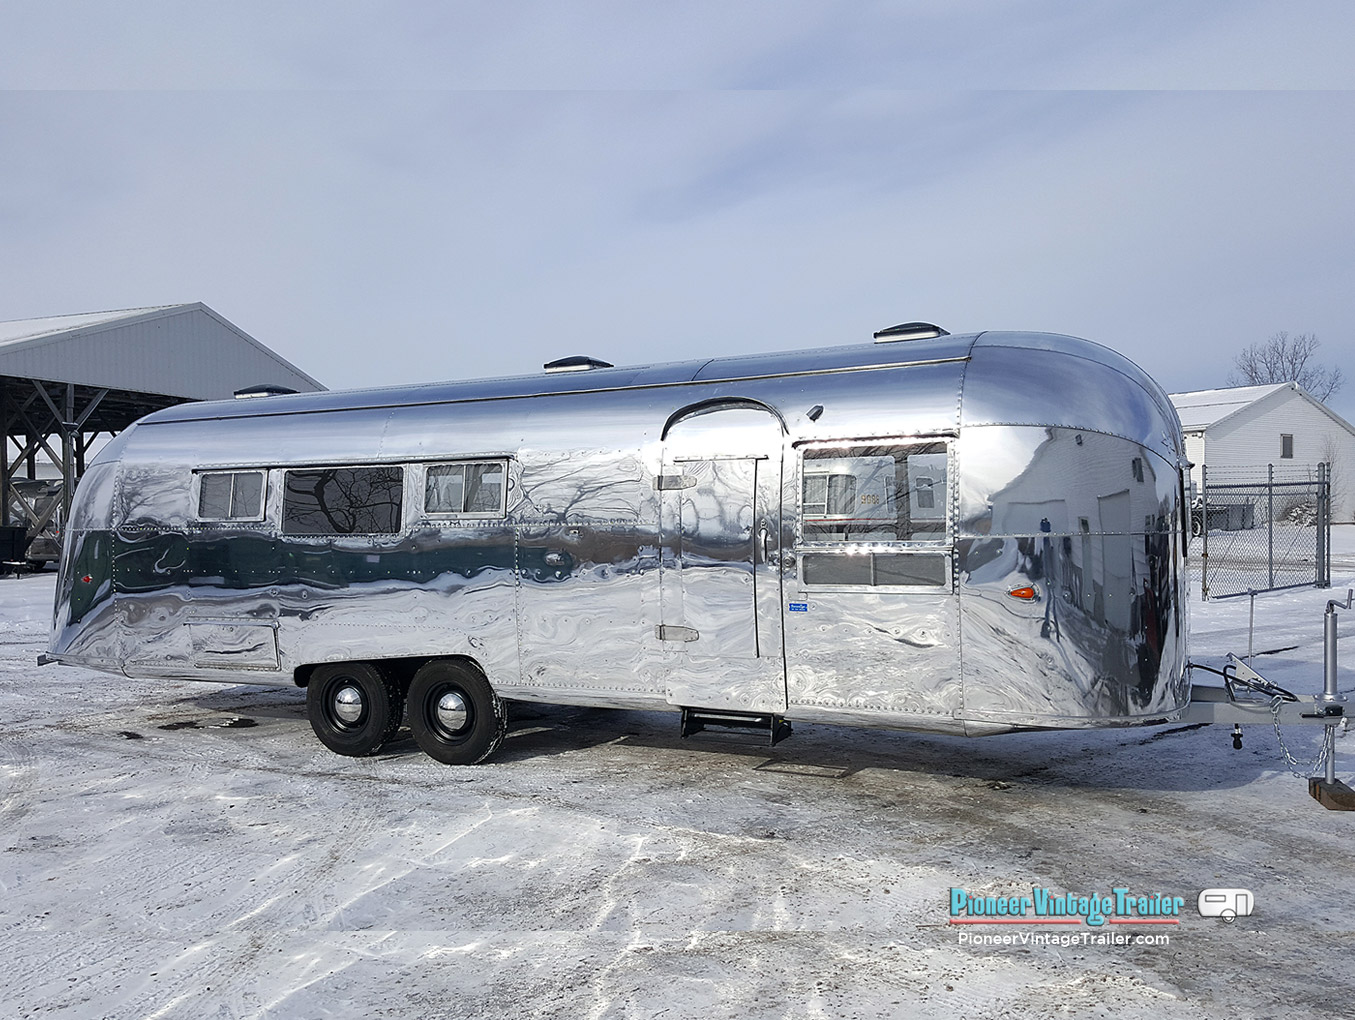 1958 Airstream Sovereign of the Road after polishing